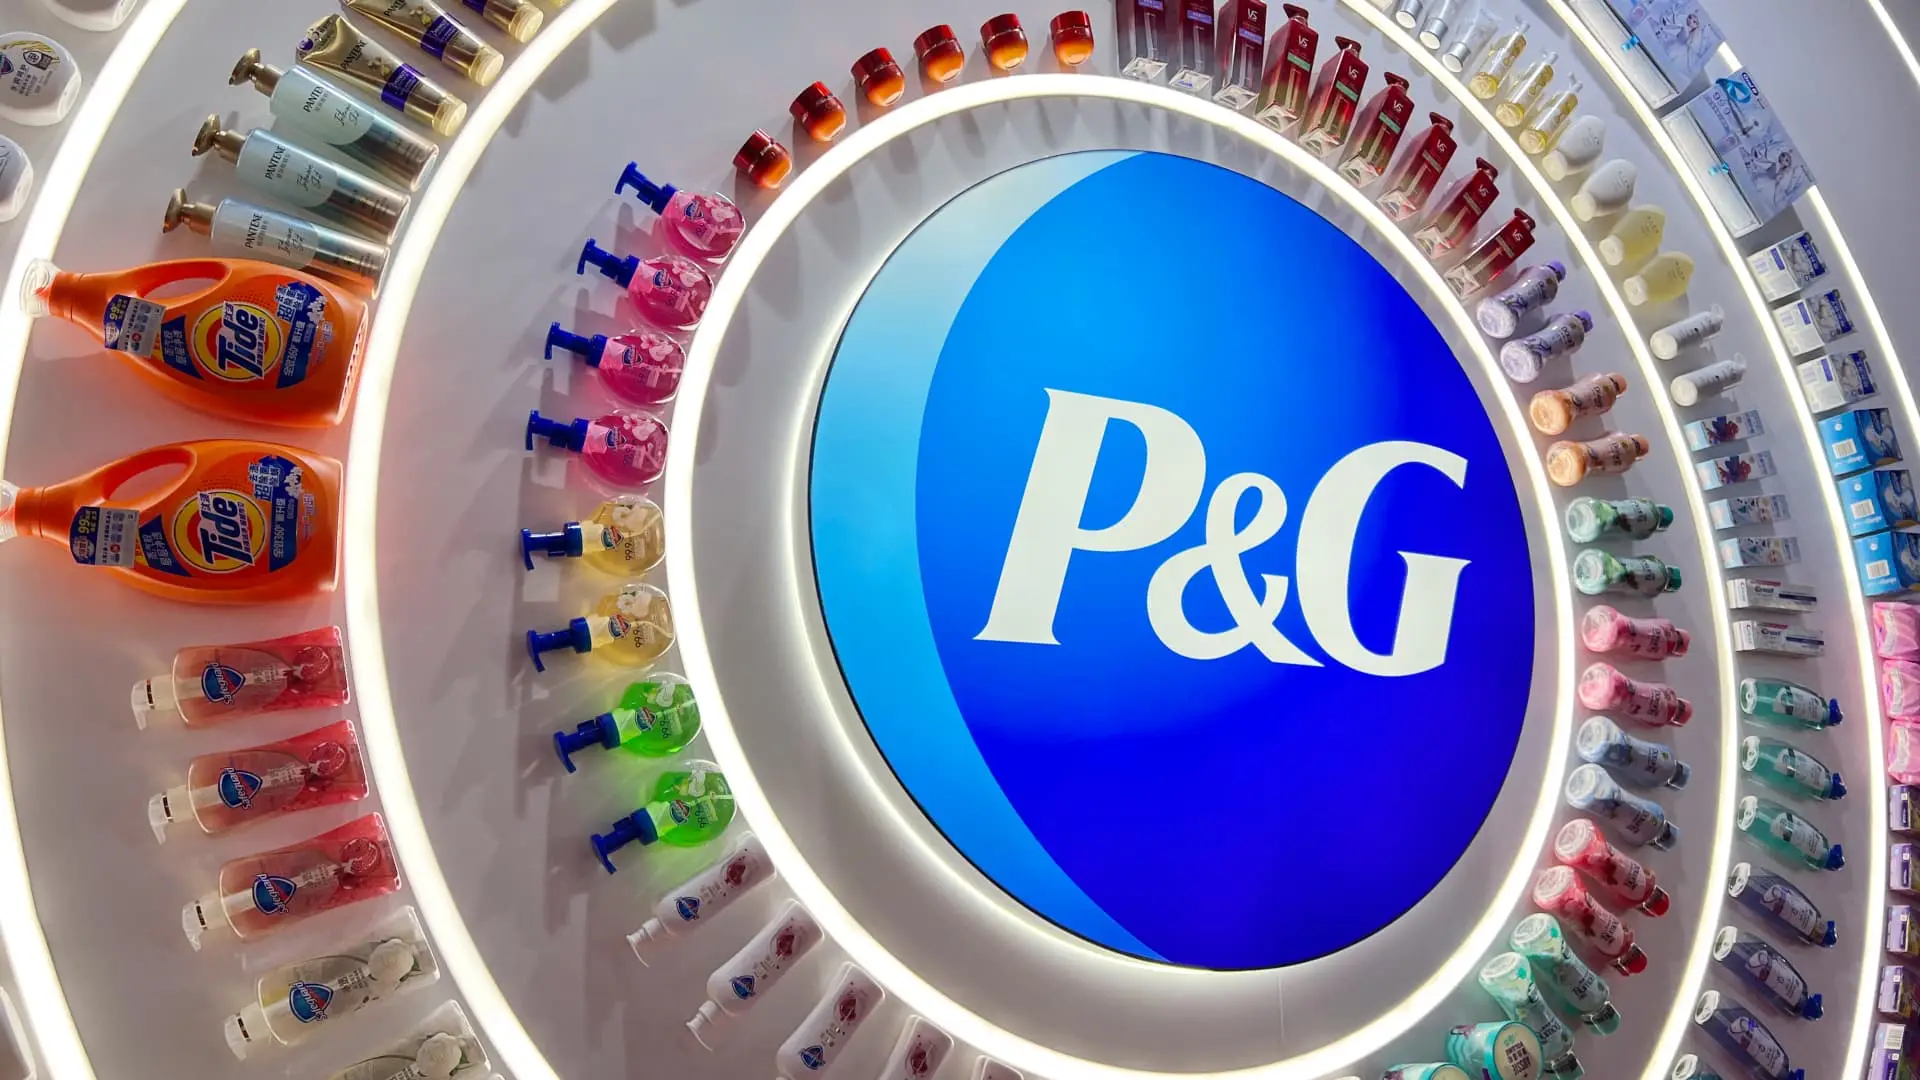 Procter & Gamble joint venture with other companies